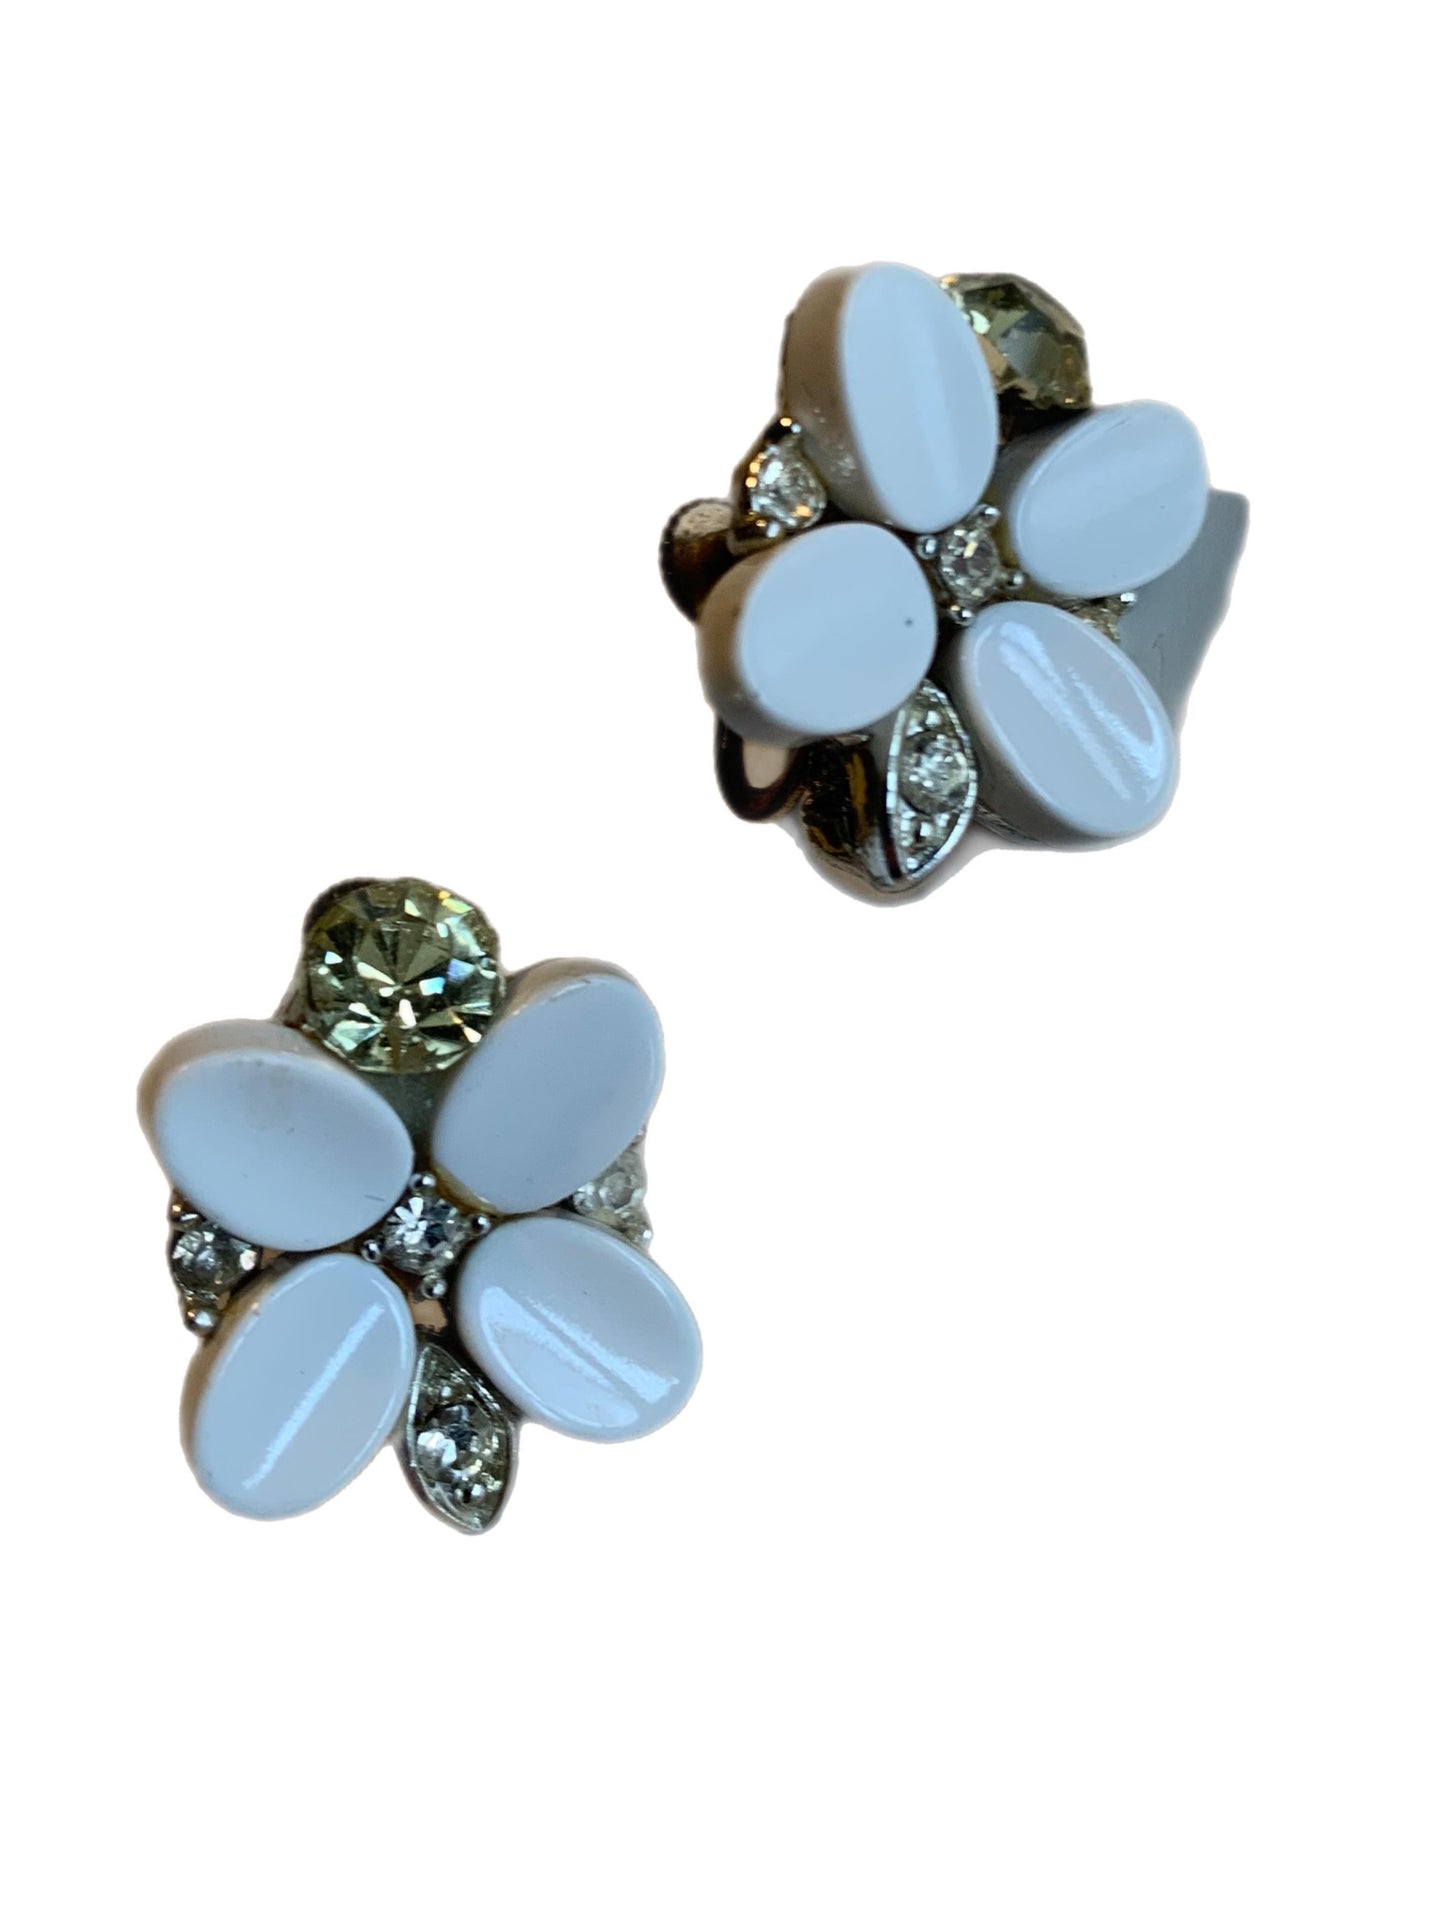 White Thermoset Plastic and Rhinestone Flower Clip Earrings circa 1960s